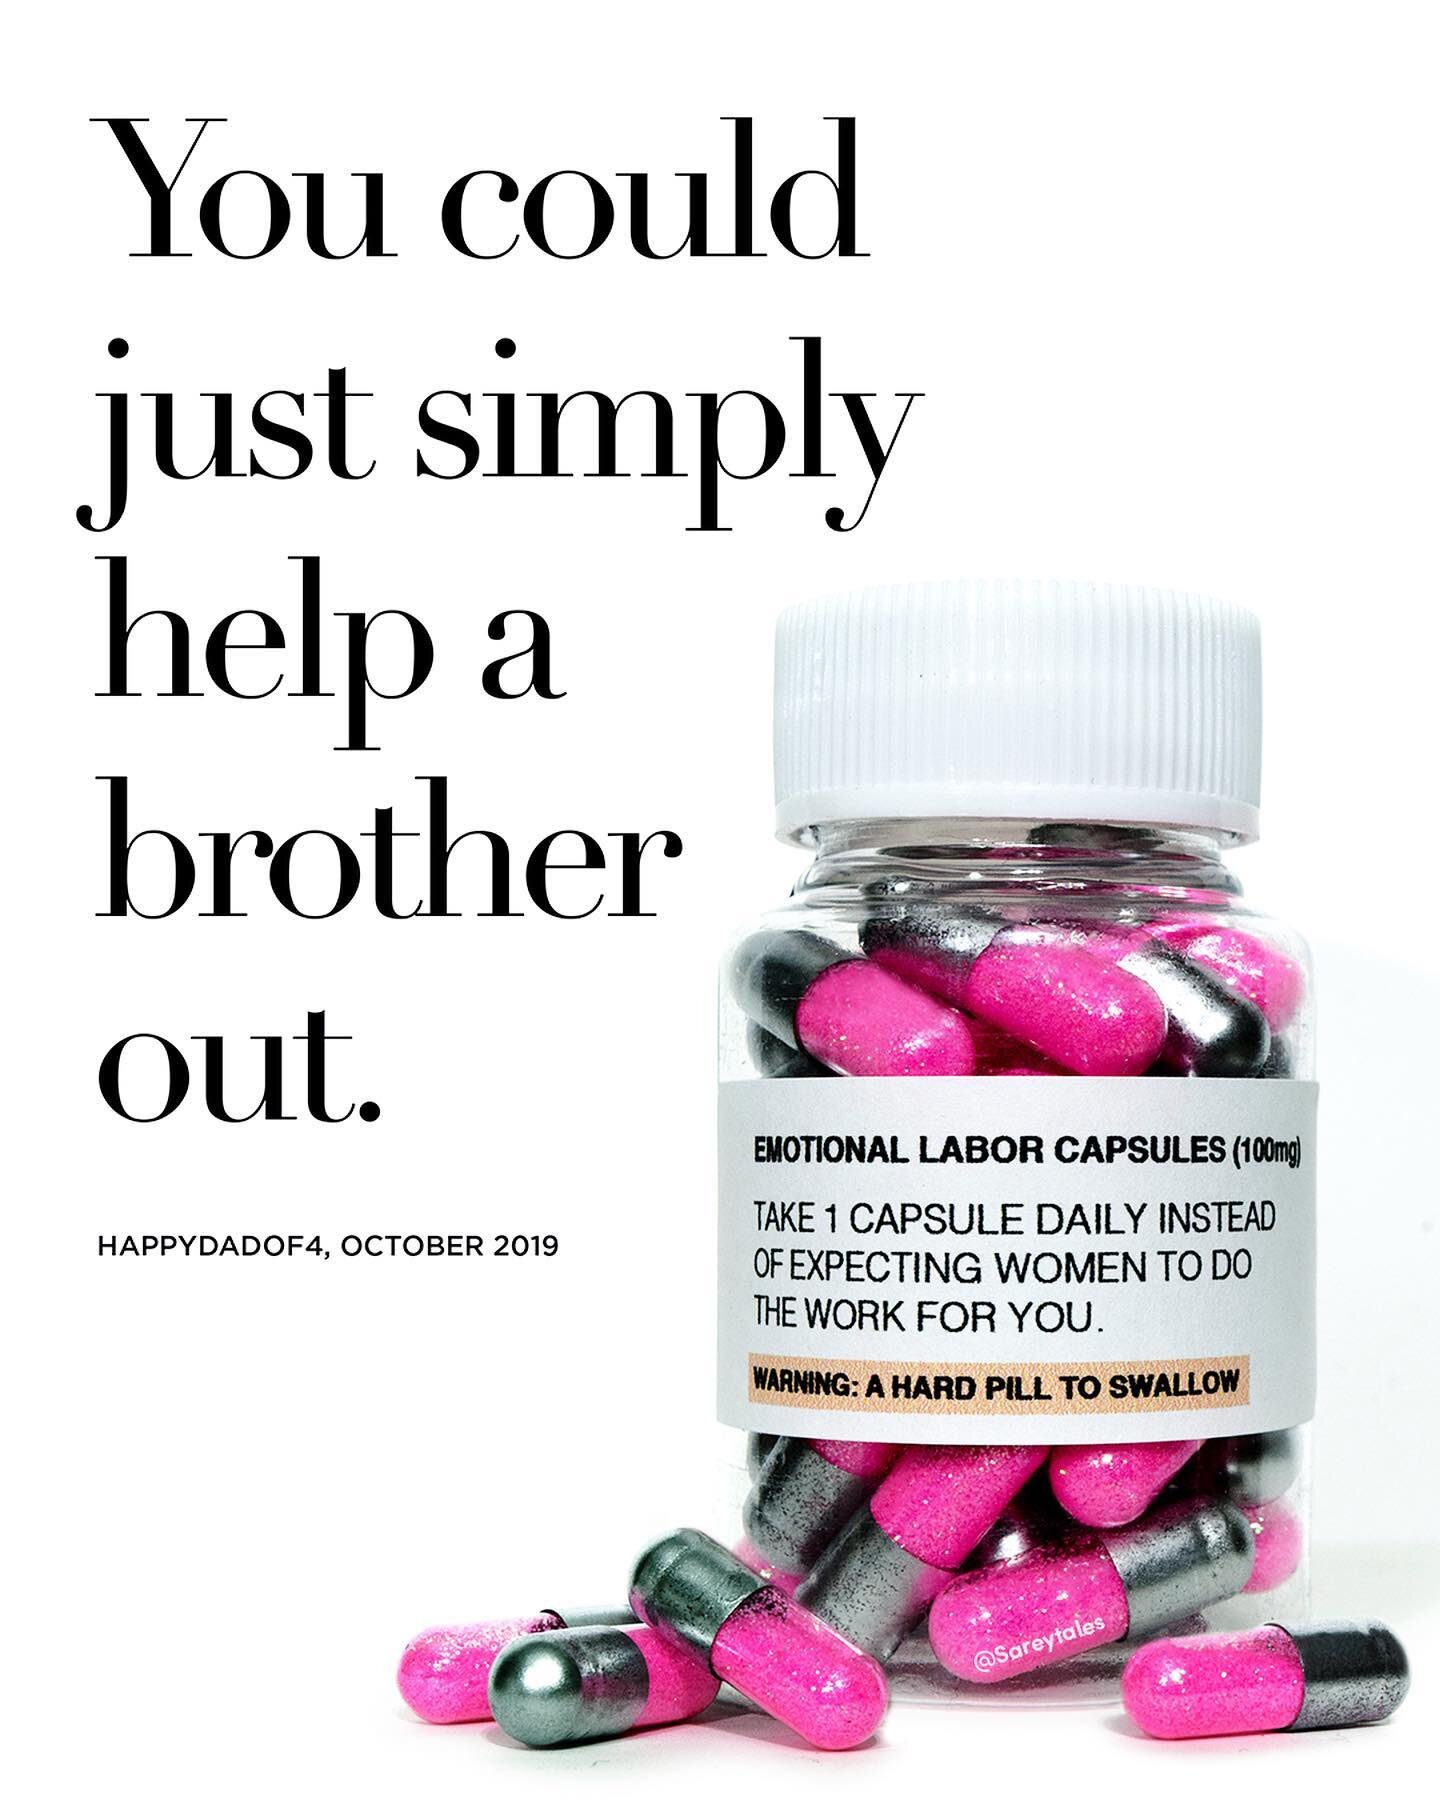 Commodity 2: Emotional Labor 💊 (metallic and pink glitter filled capsules + Rx jar + digital illustration, repost from 2020)
.
Be perfect, work for free. Love is the lock, and silence the key.
.
📣Emotional Labor 📣
.
Women have been socialized to a